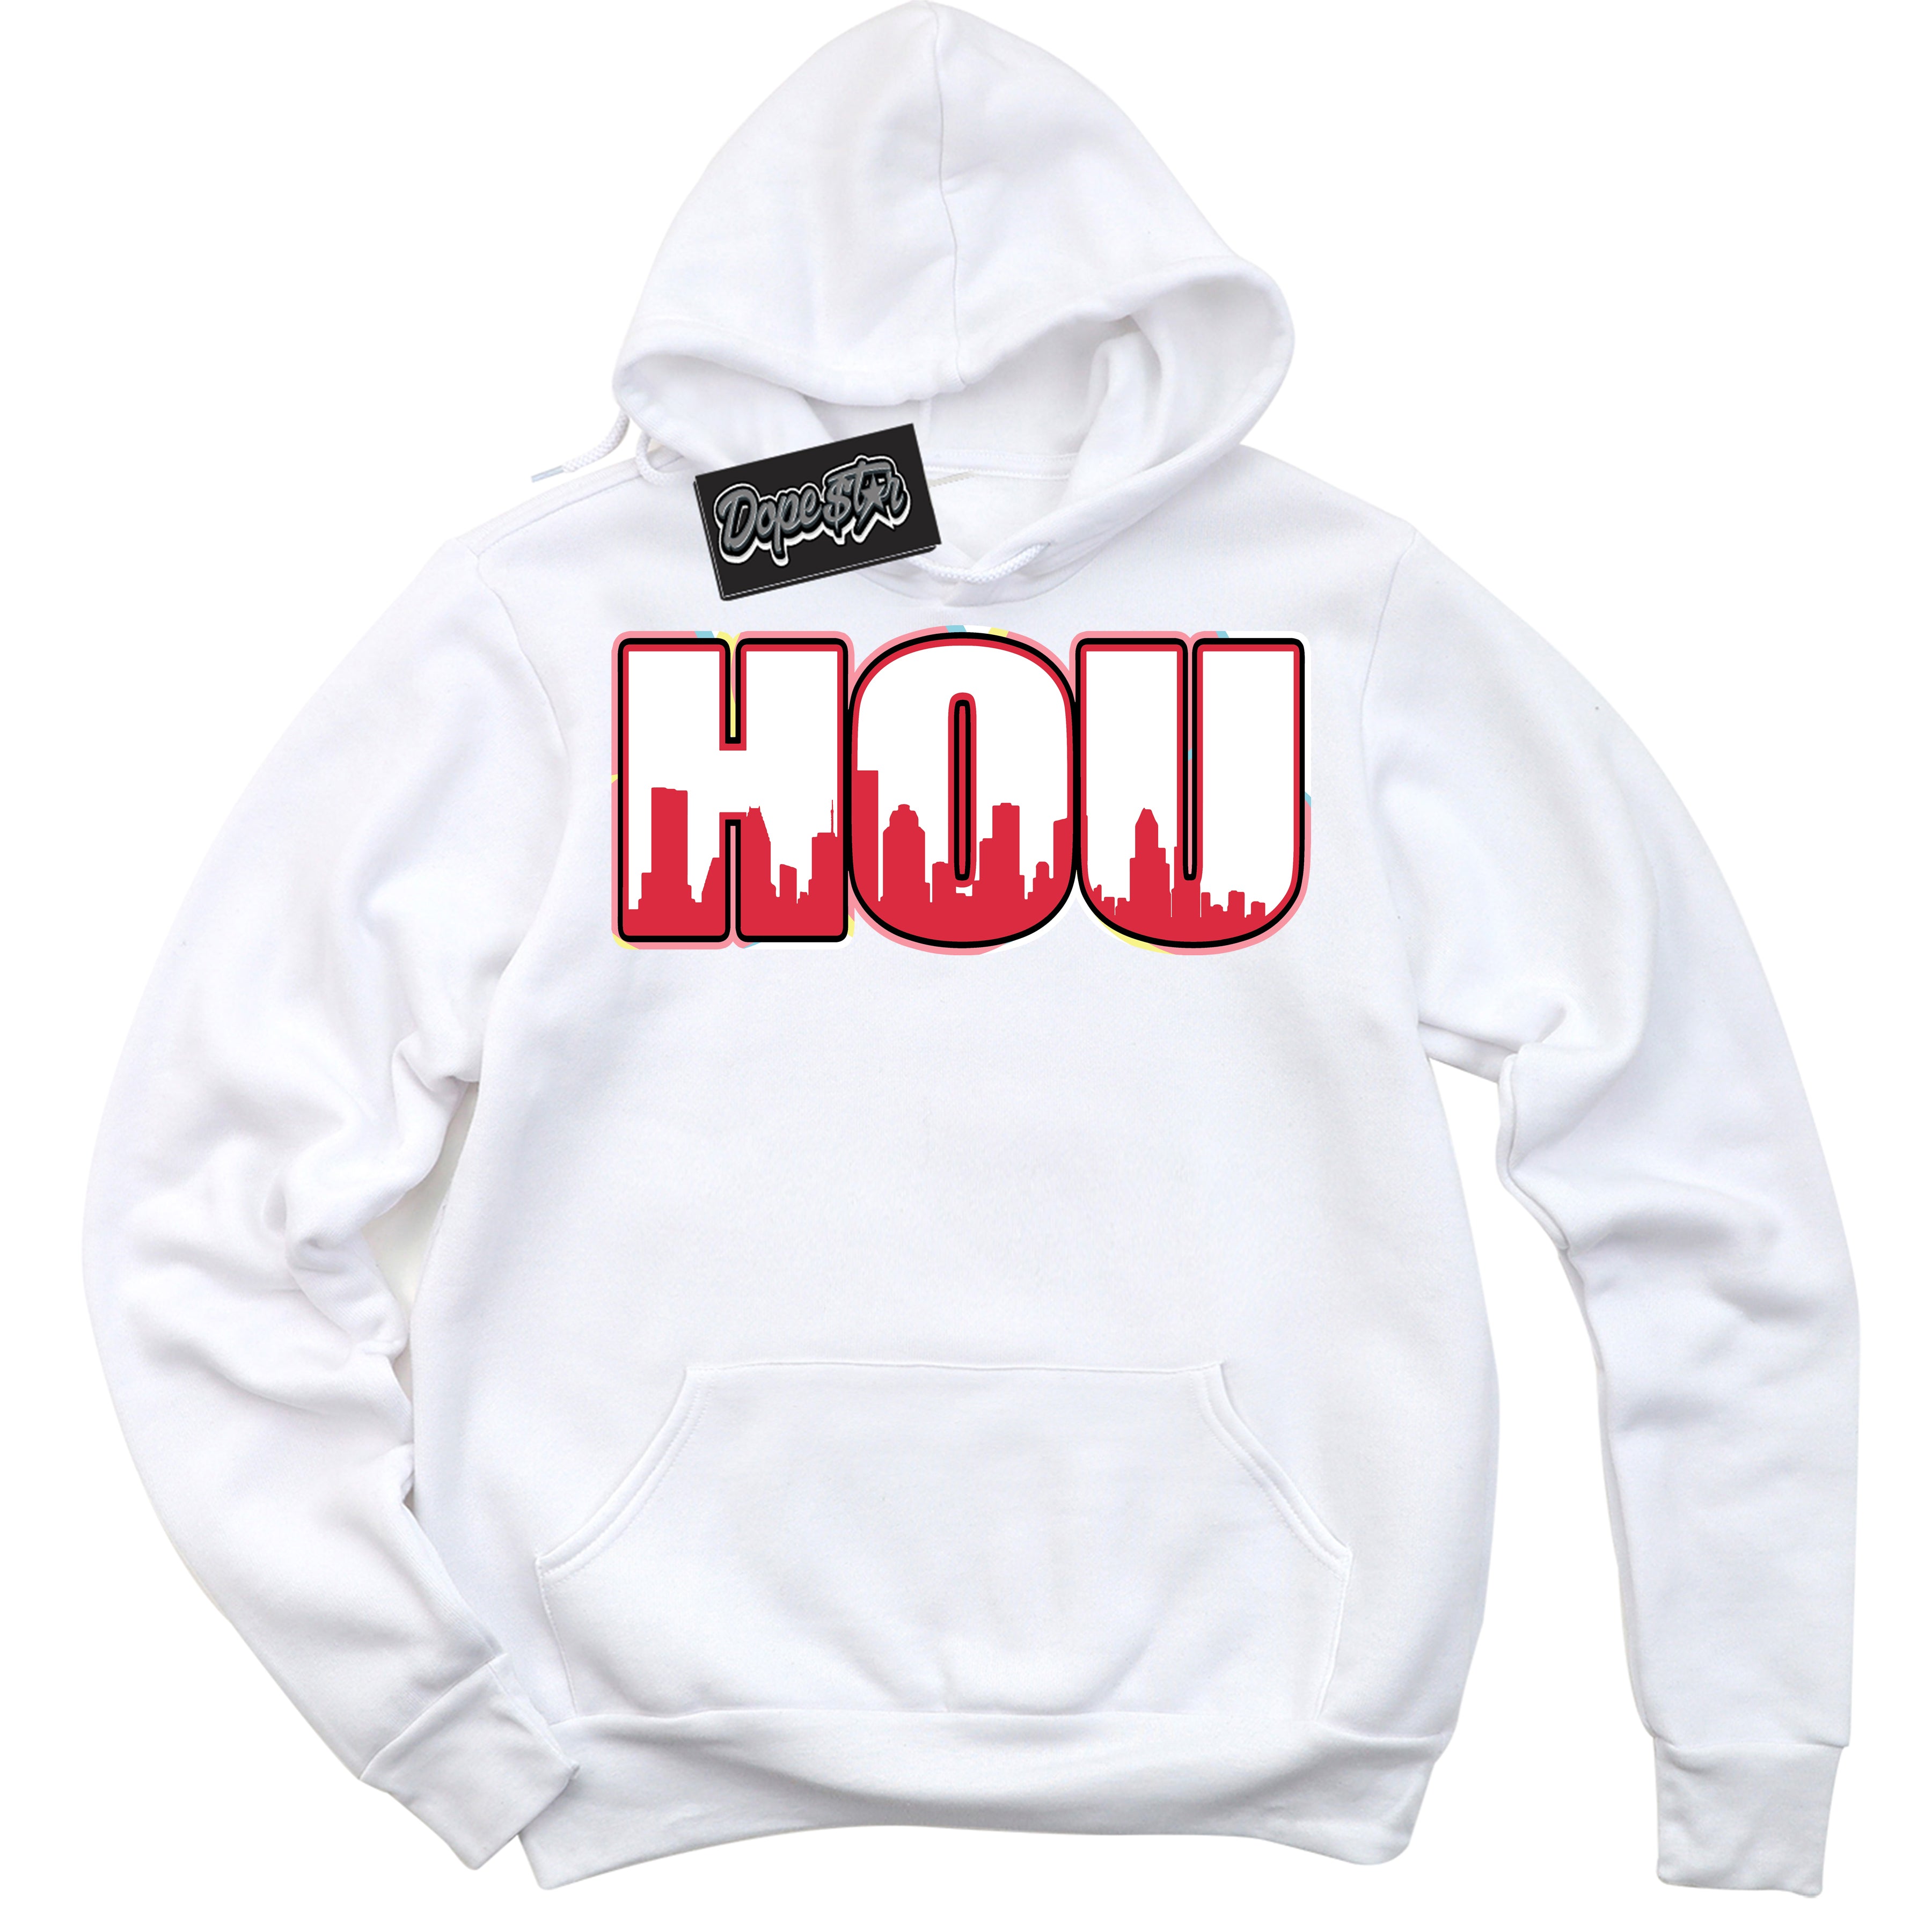 Cool White Graphic DopeStar Hoodie with “ Houston “ print, that perfectly matches Spider-Verse 1s sneakers